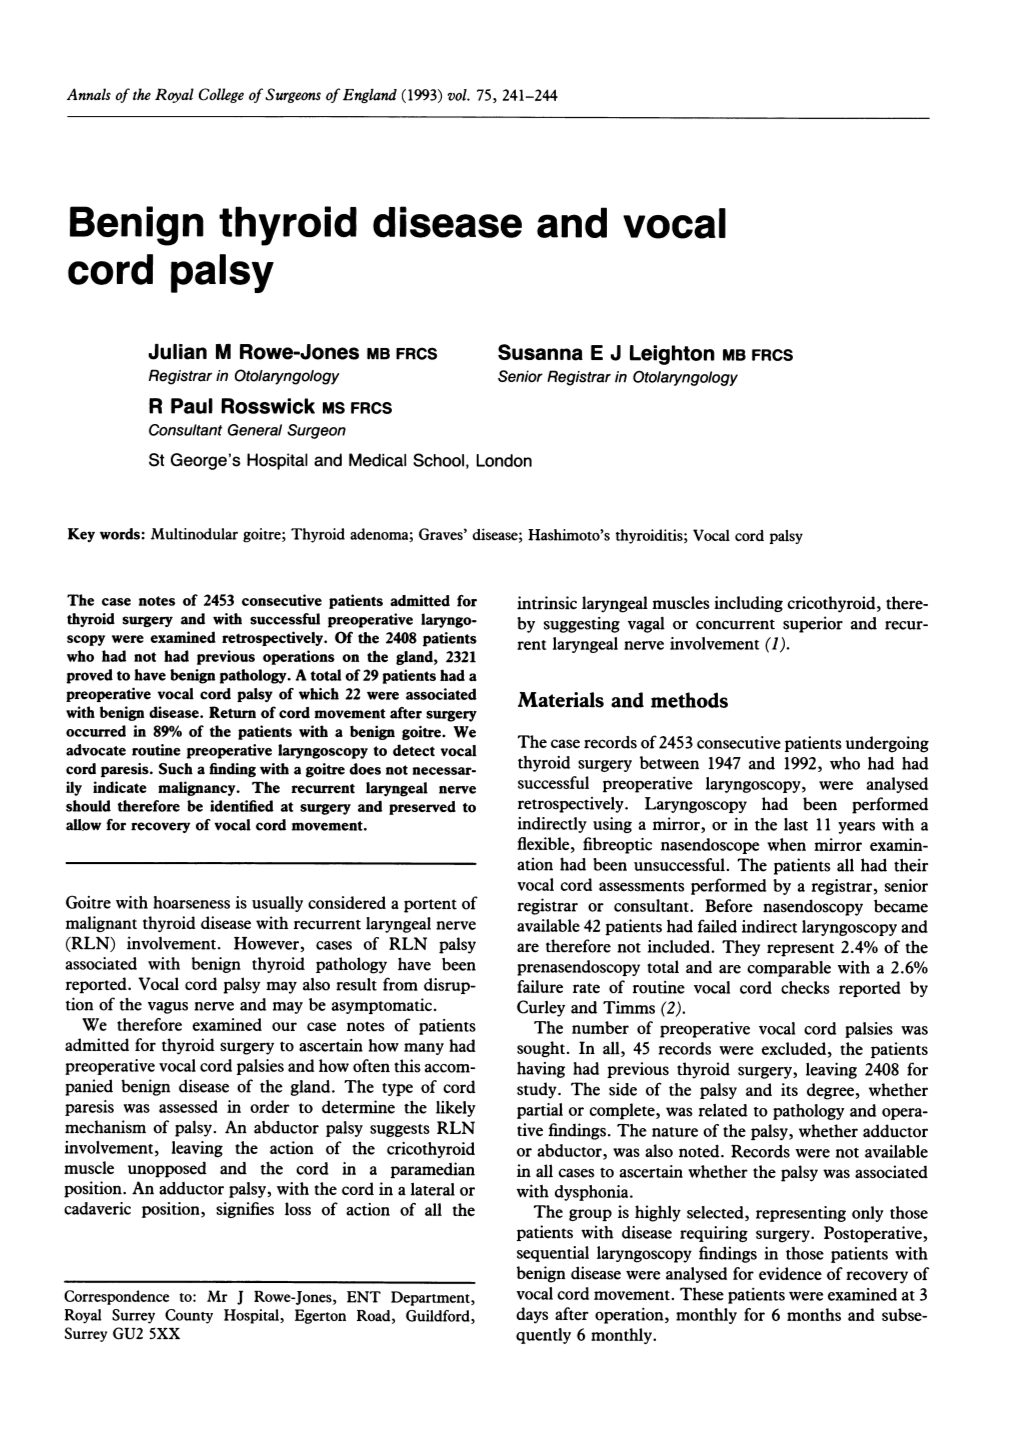 Benign Thyroid Disease and Vocal Cord Palsy